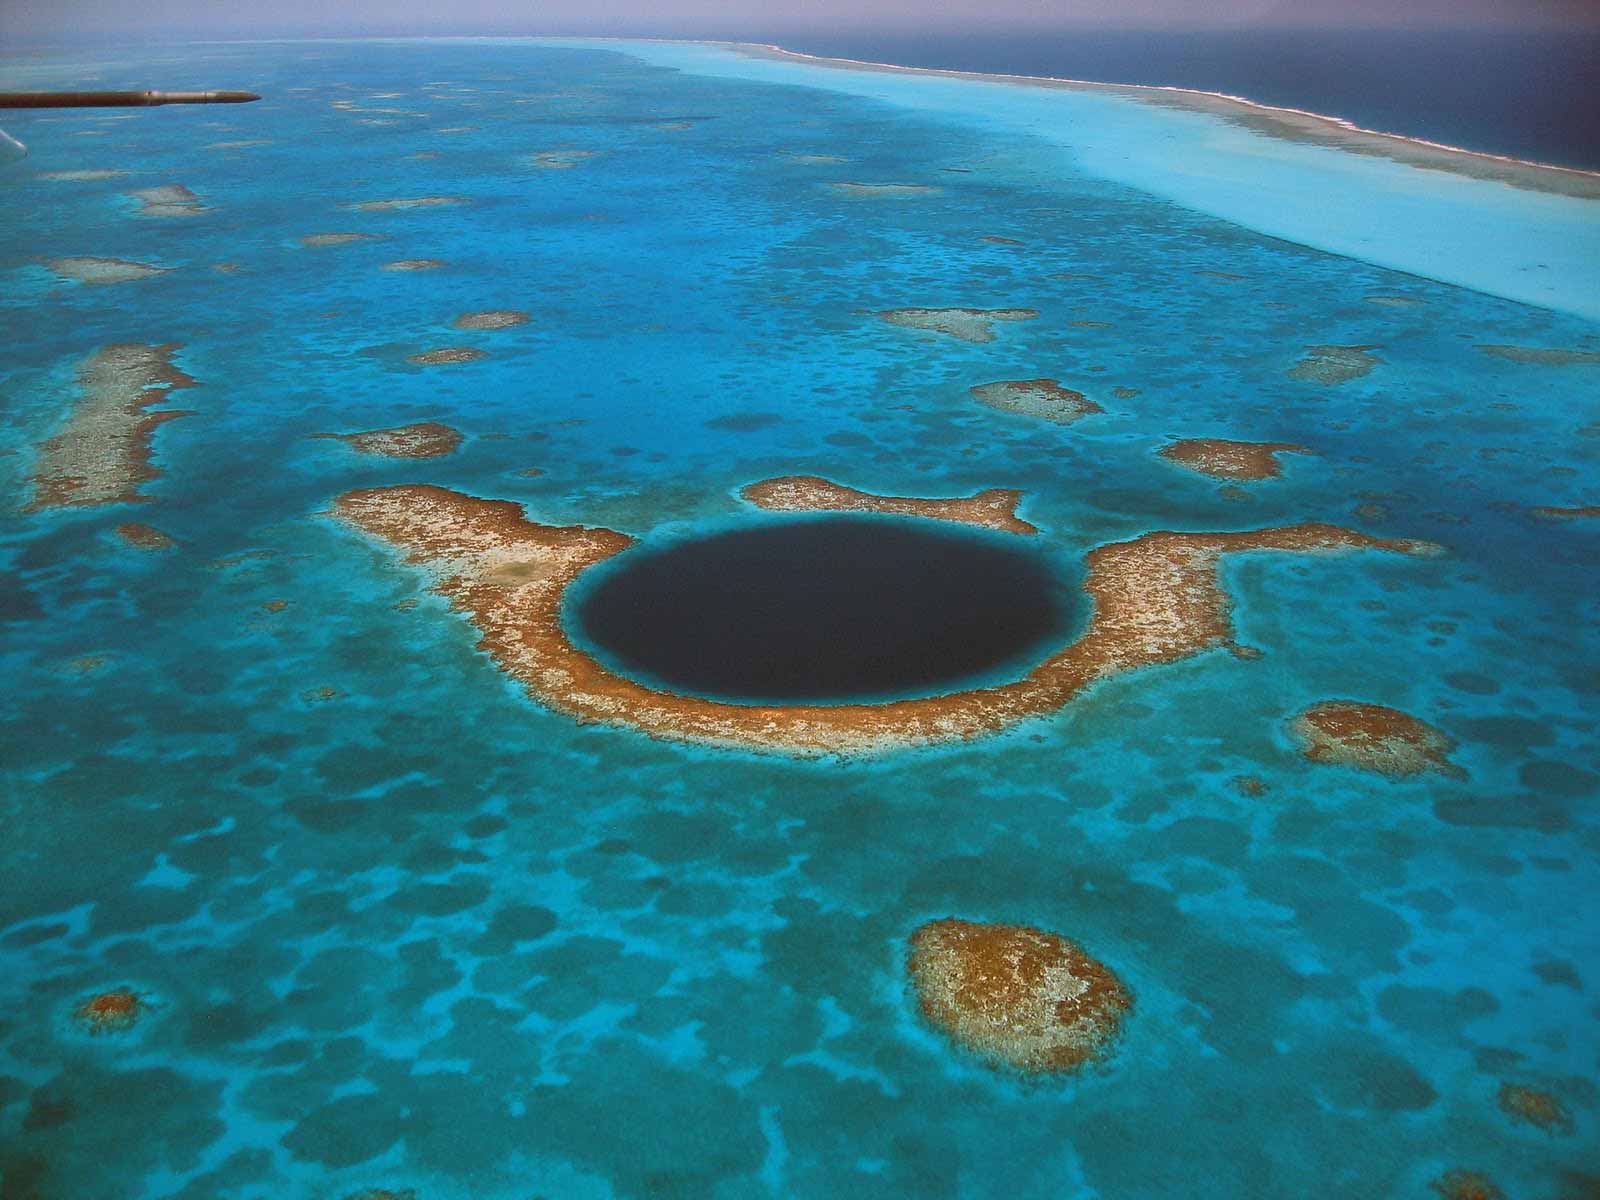 How Do You Top The World's Greatest Blue Hole Dive? | MaduroDive Blog